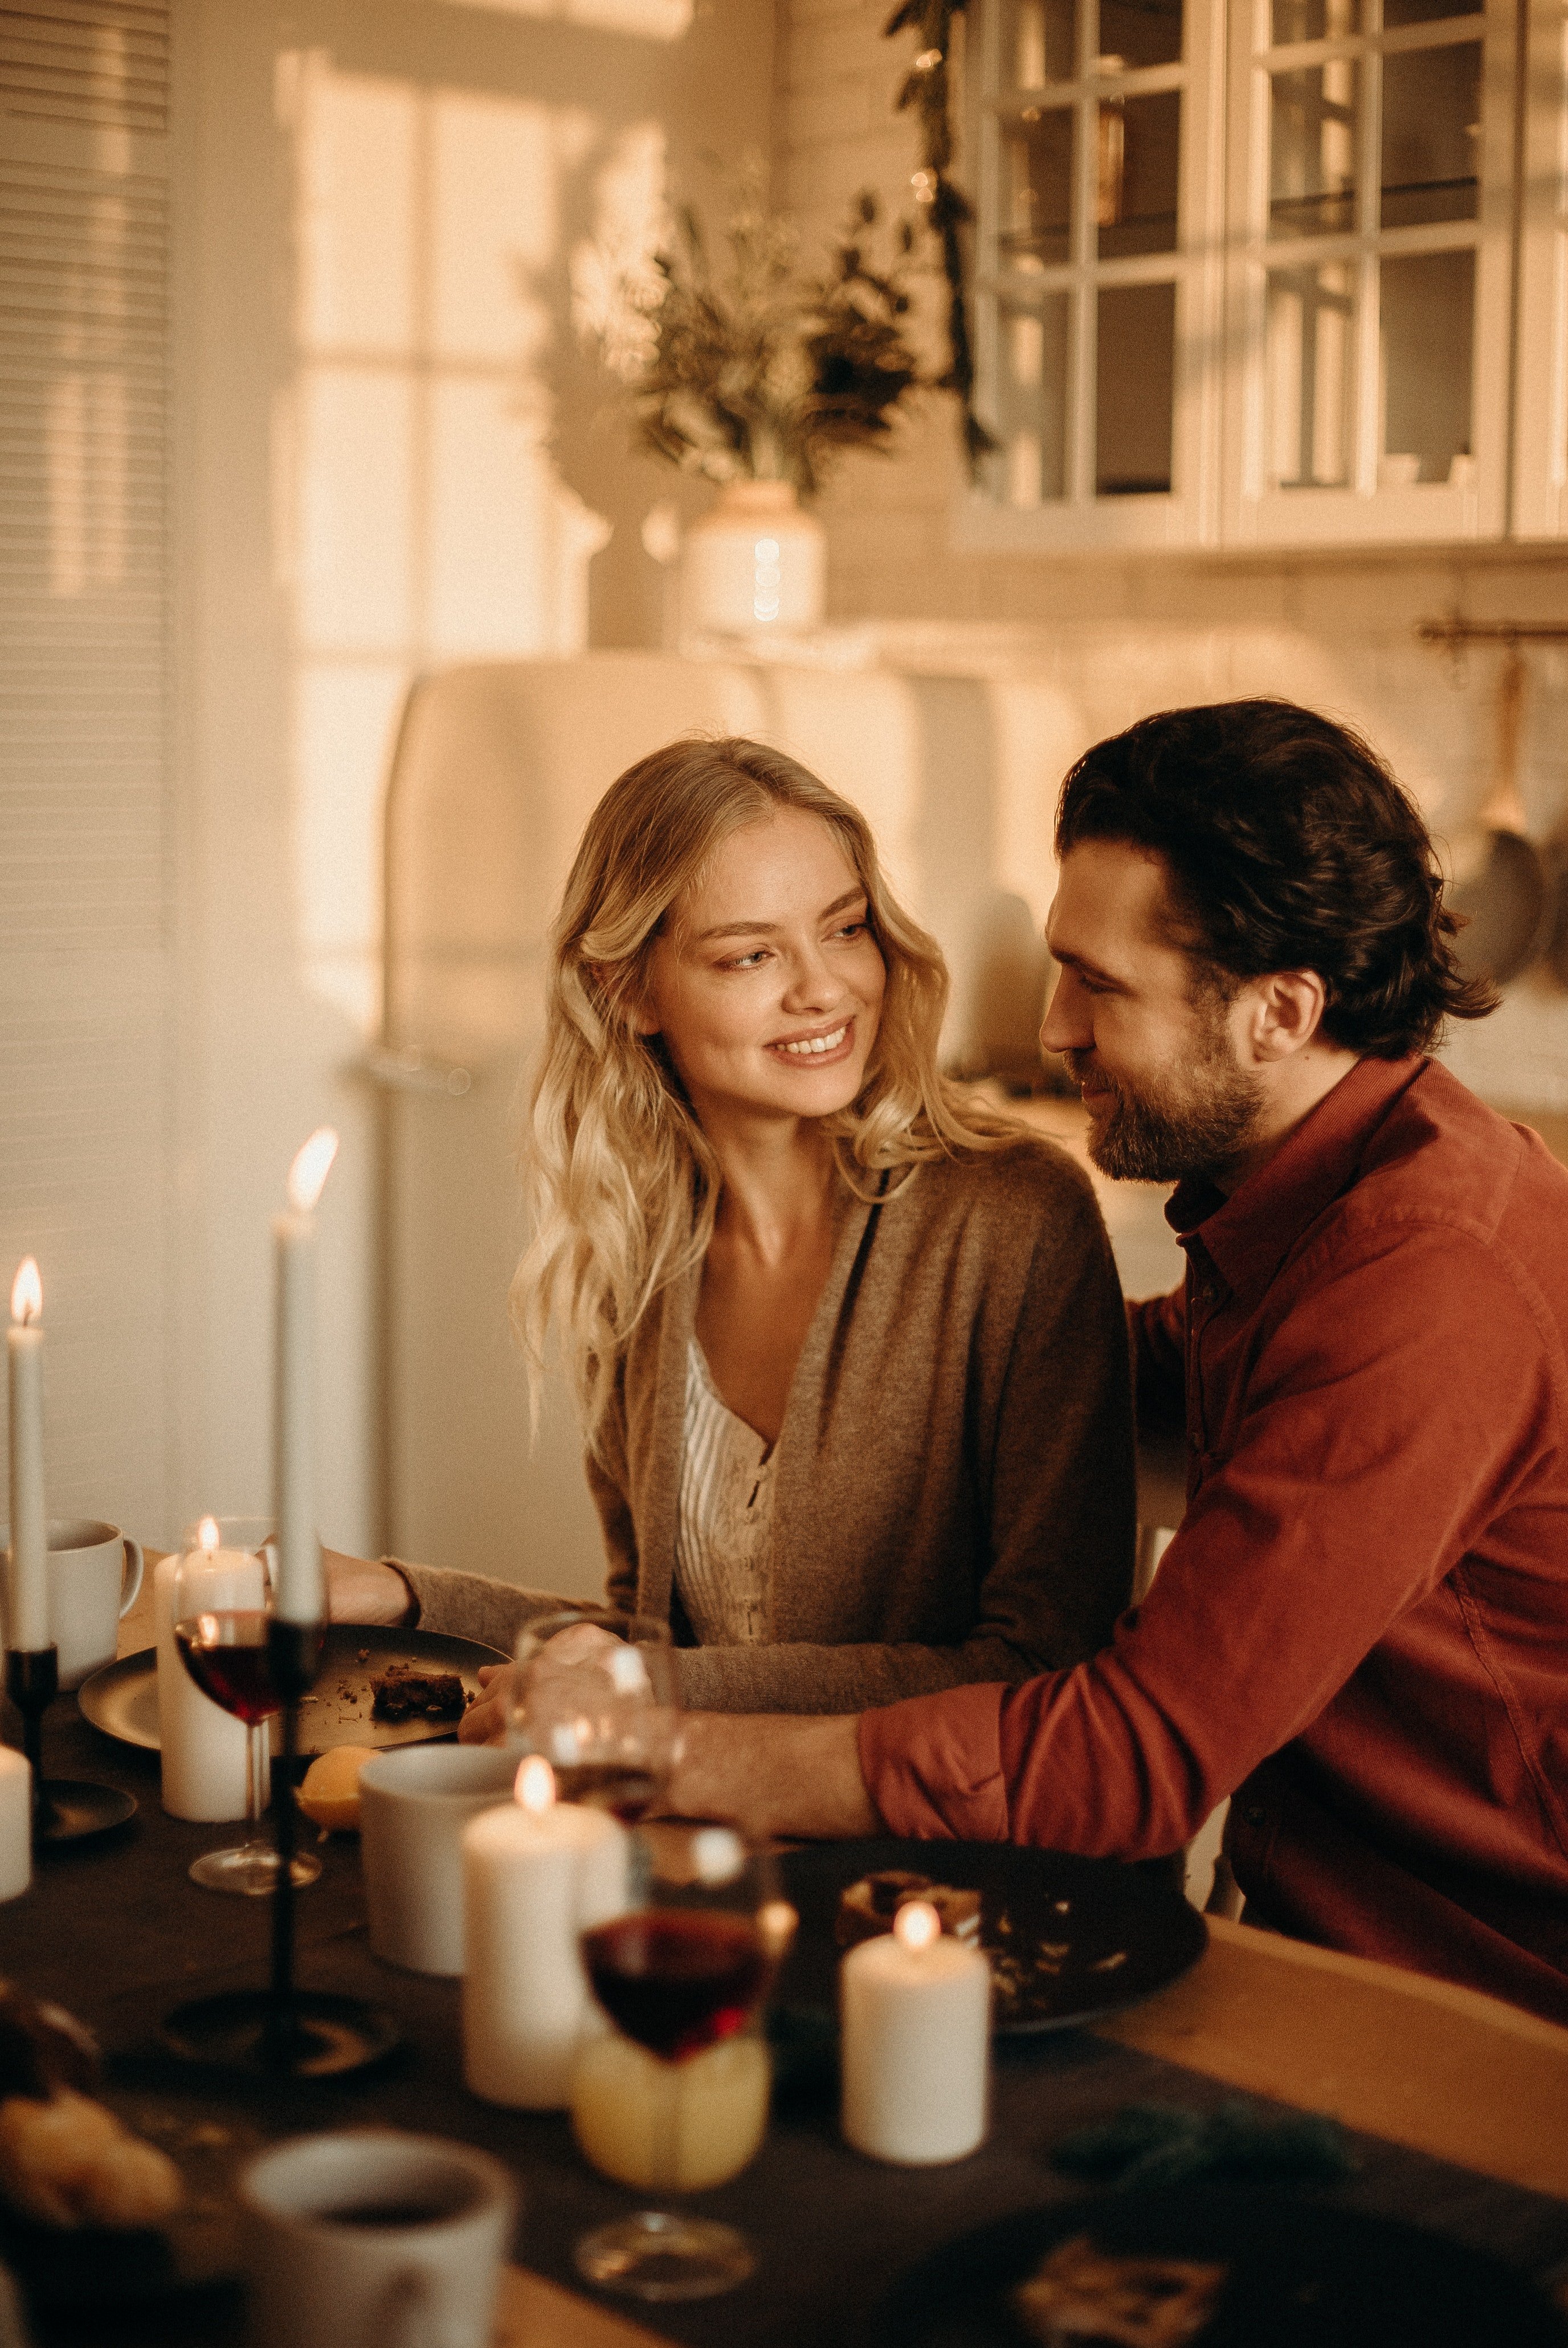 The woman enjoyed a nice romantic dinner with her lover. | Photo: Pexels